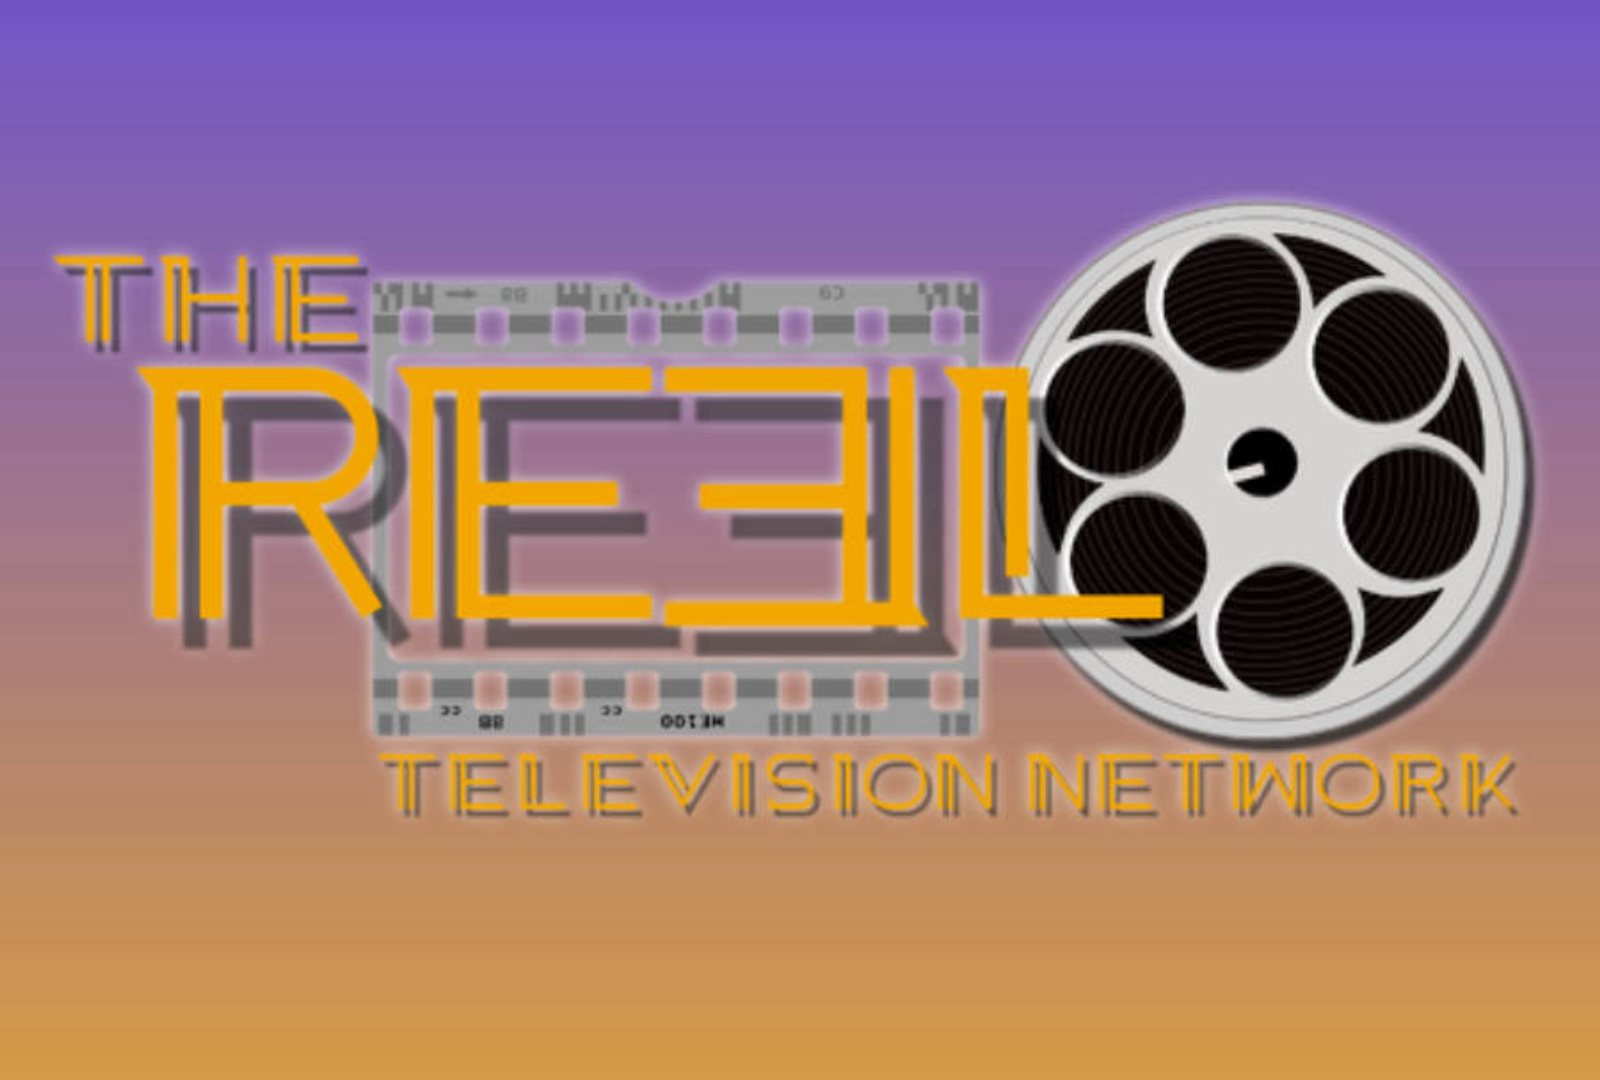 The REEL Television Network